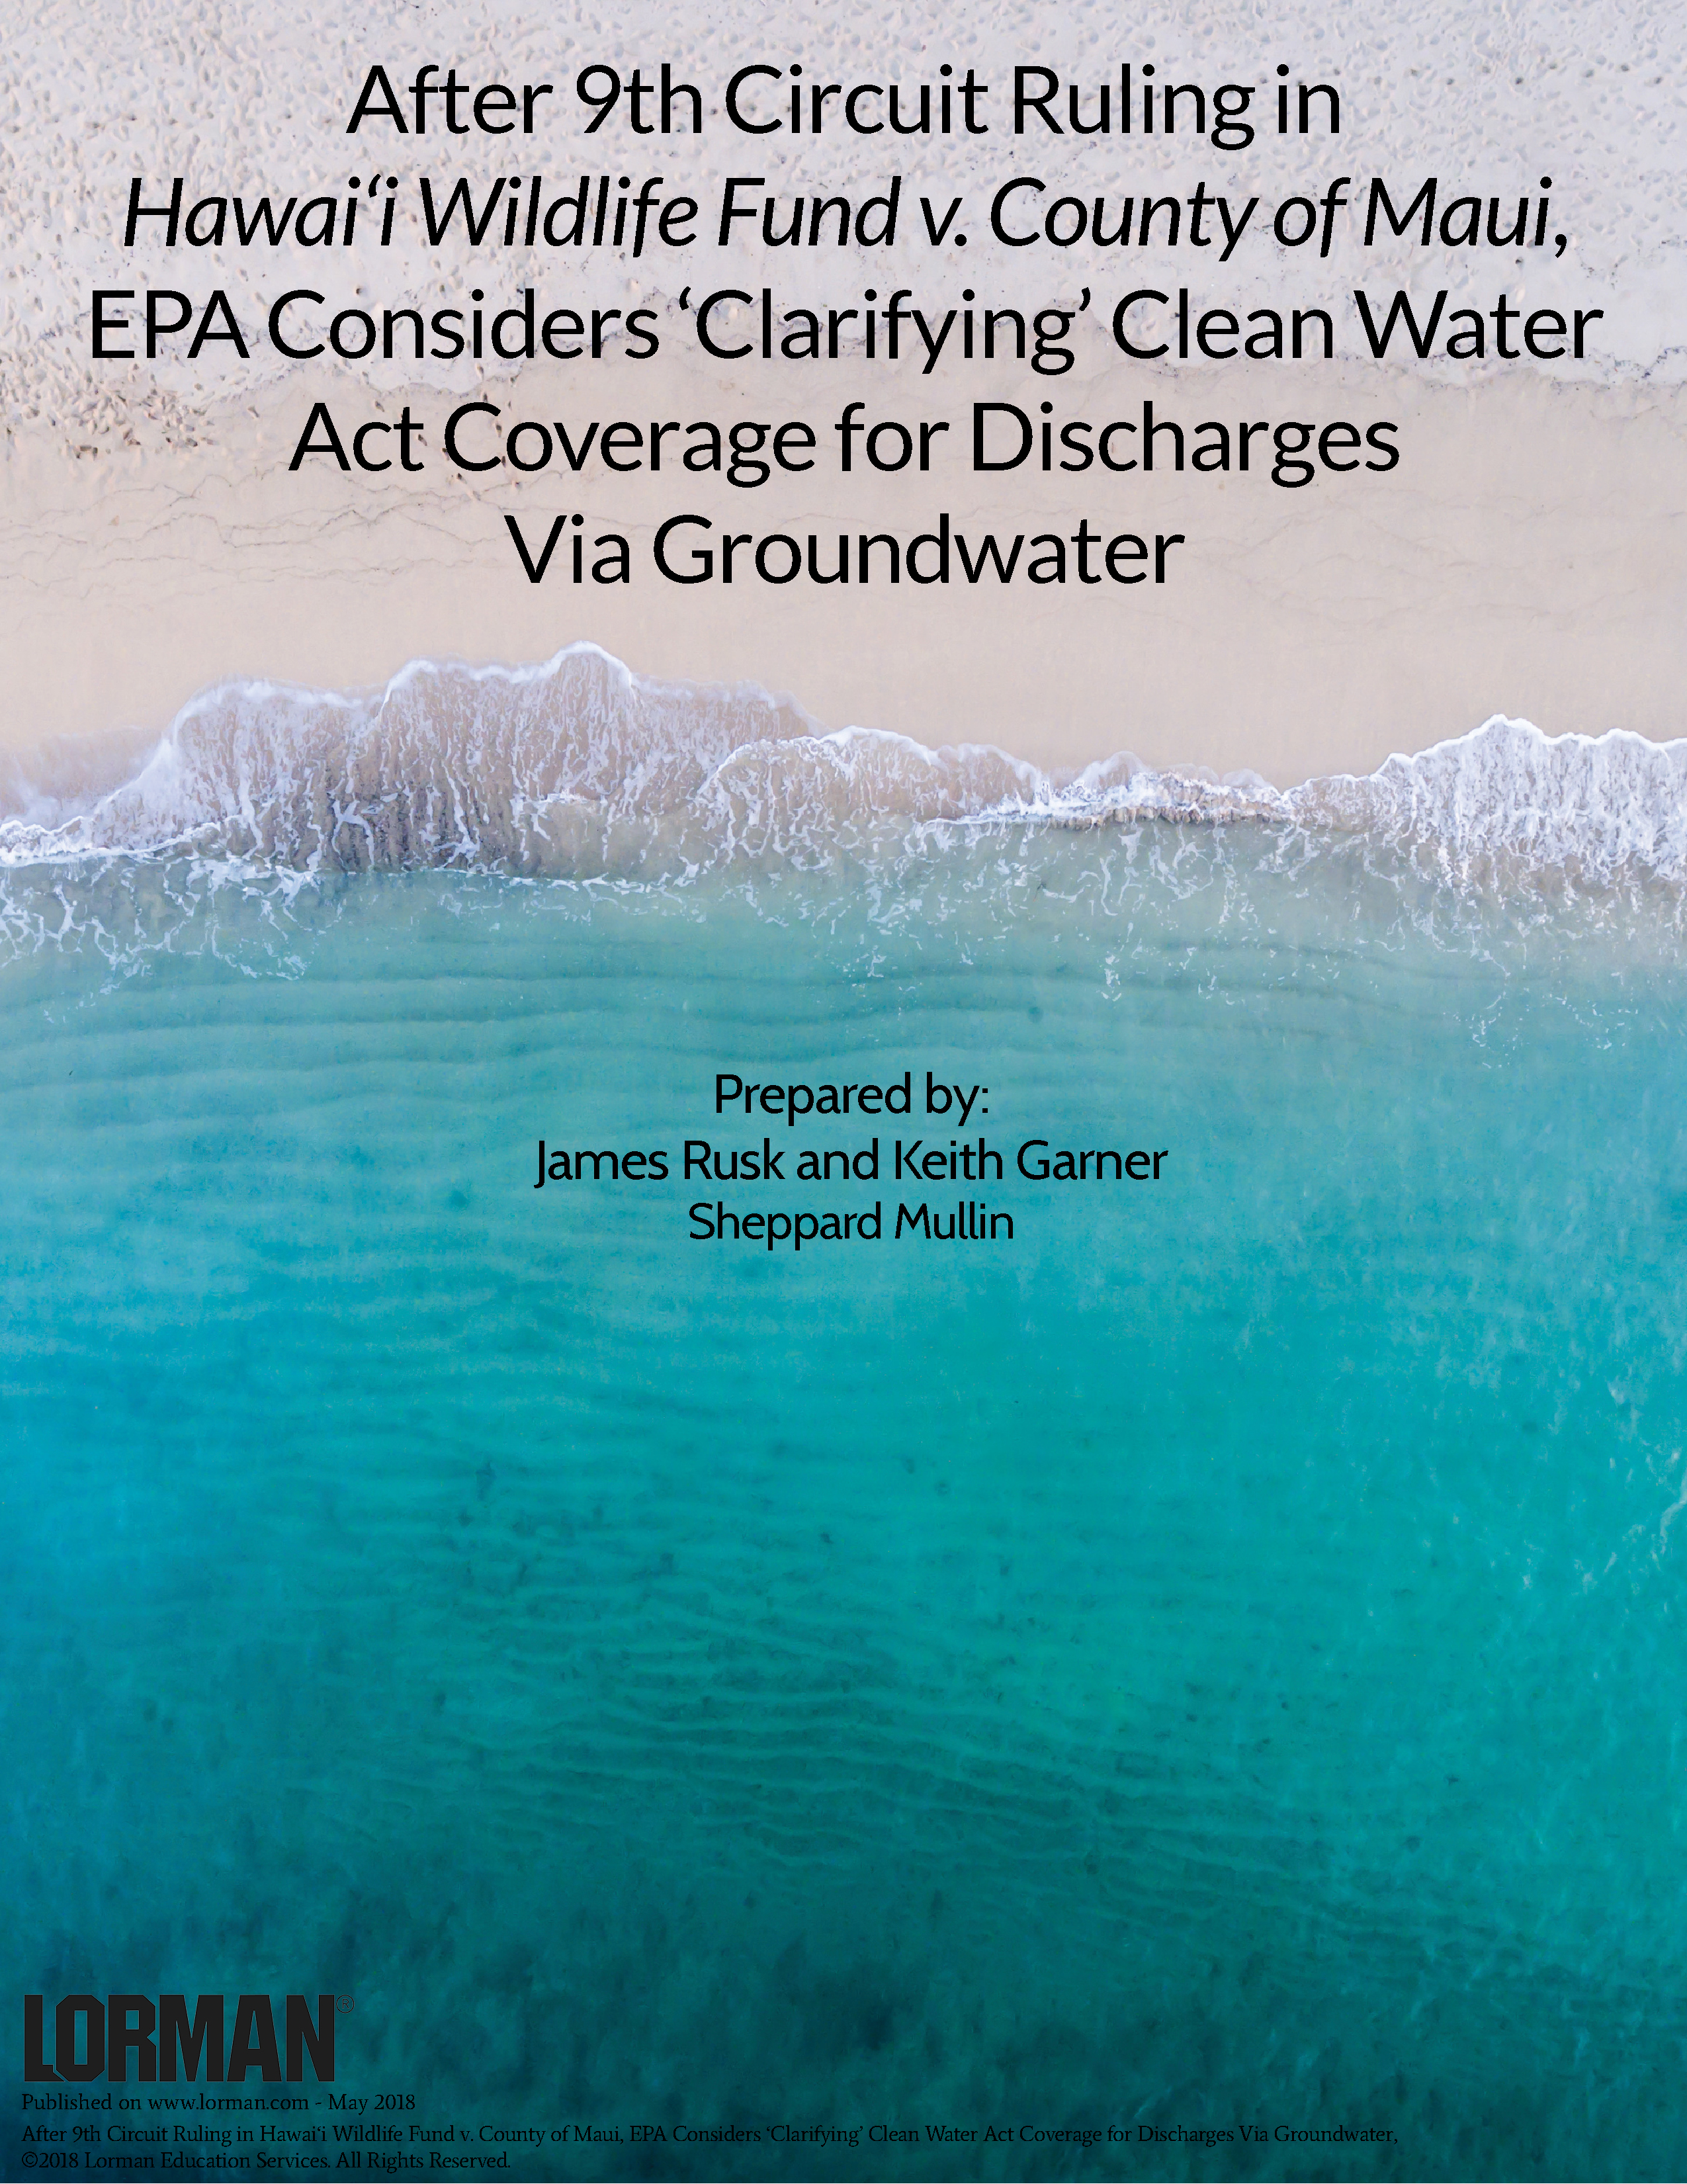 EPA Considers Clarifying Clean Water Act Coverage for Discharges via Groundwater